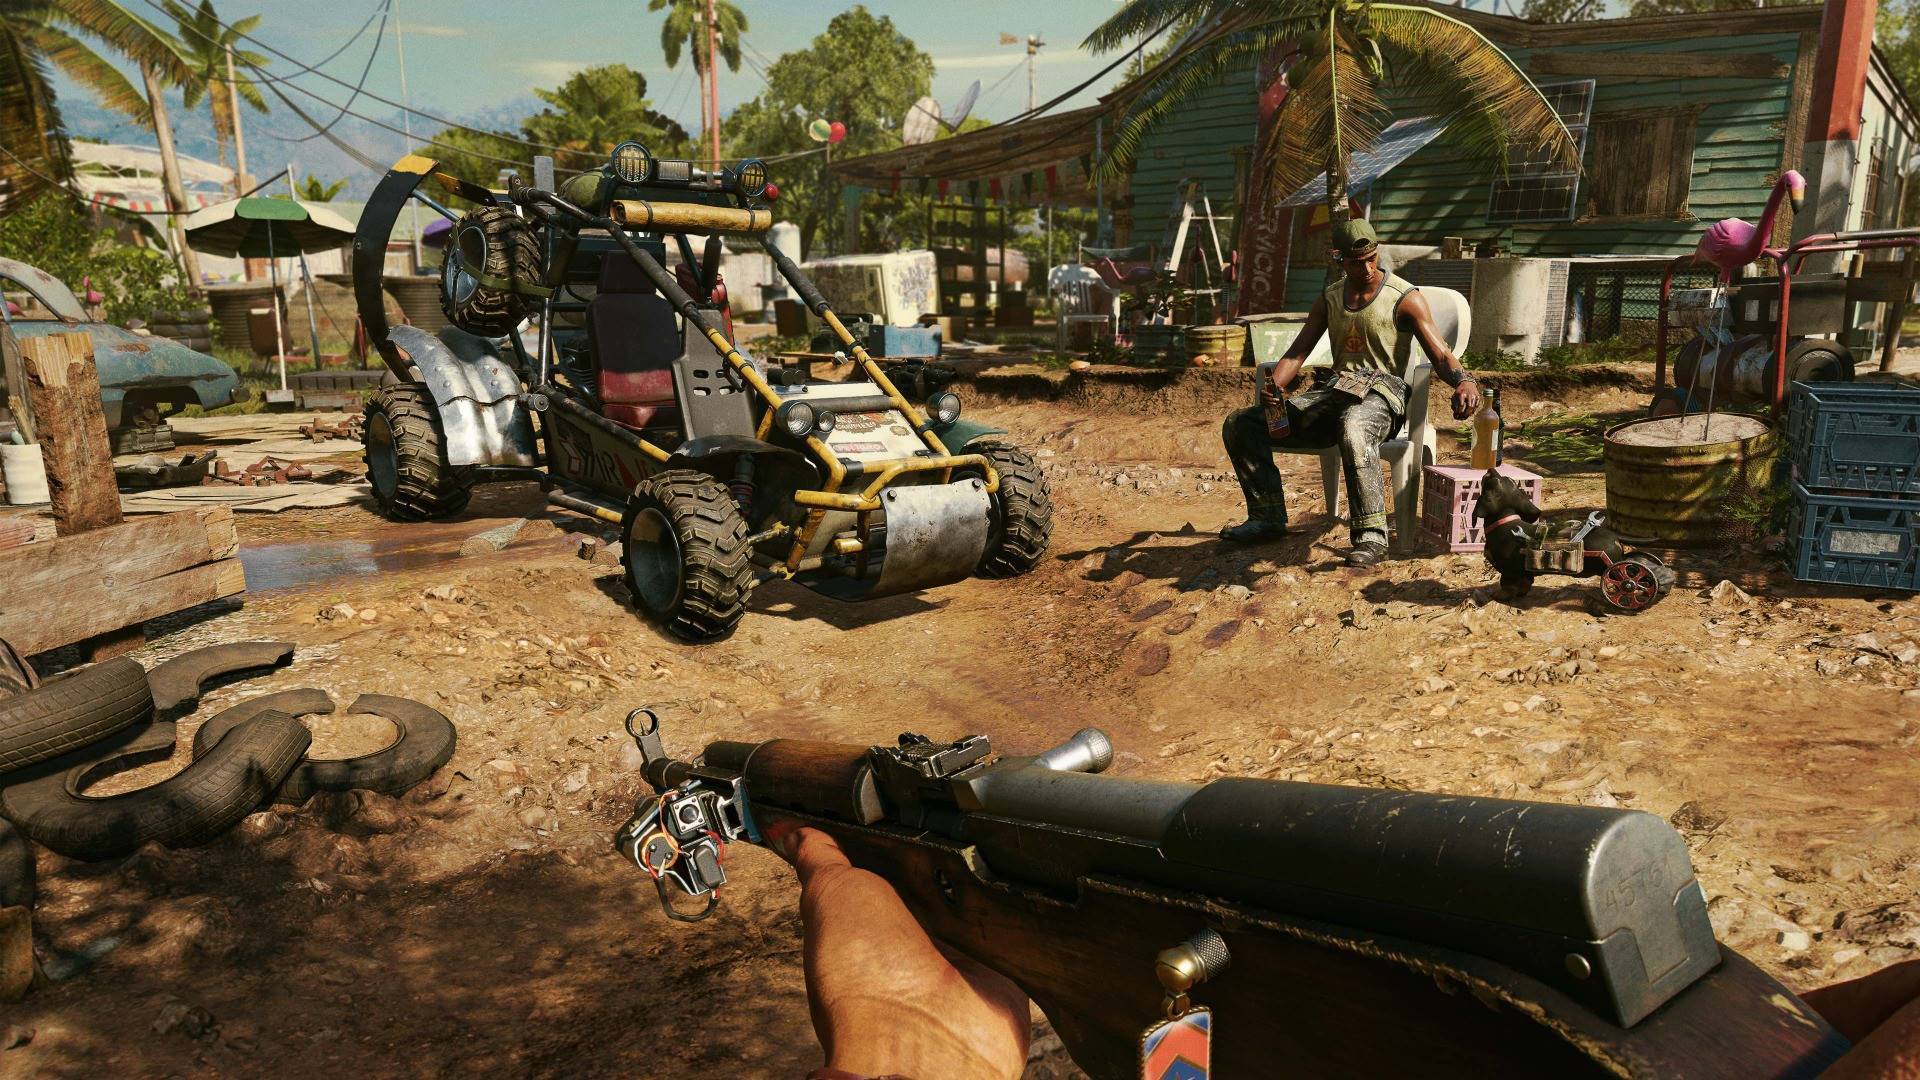 far cry 4 key says it only works in europe